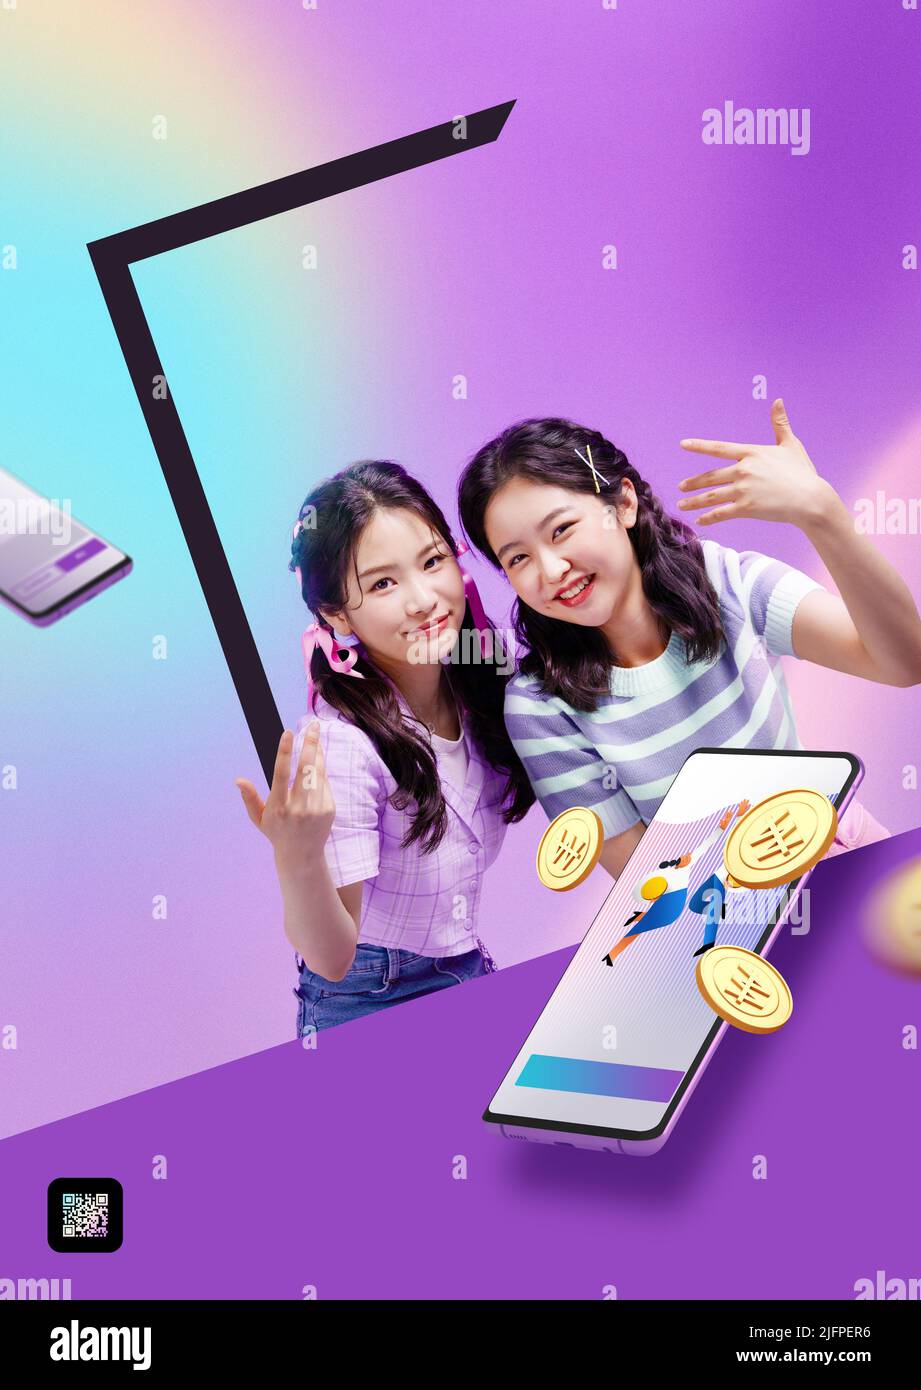 Z generation poster invest in stocks, two Korean girls with mobile phone apps Stock Photo